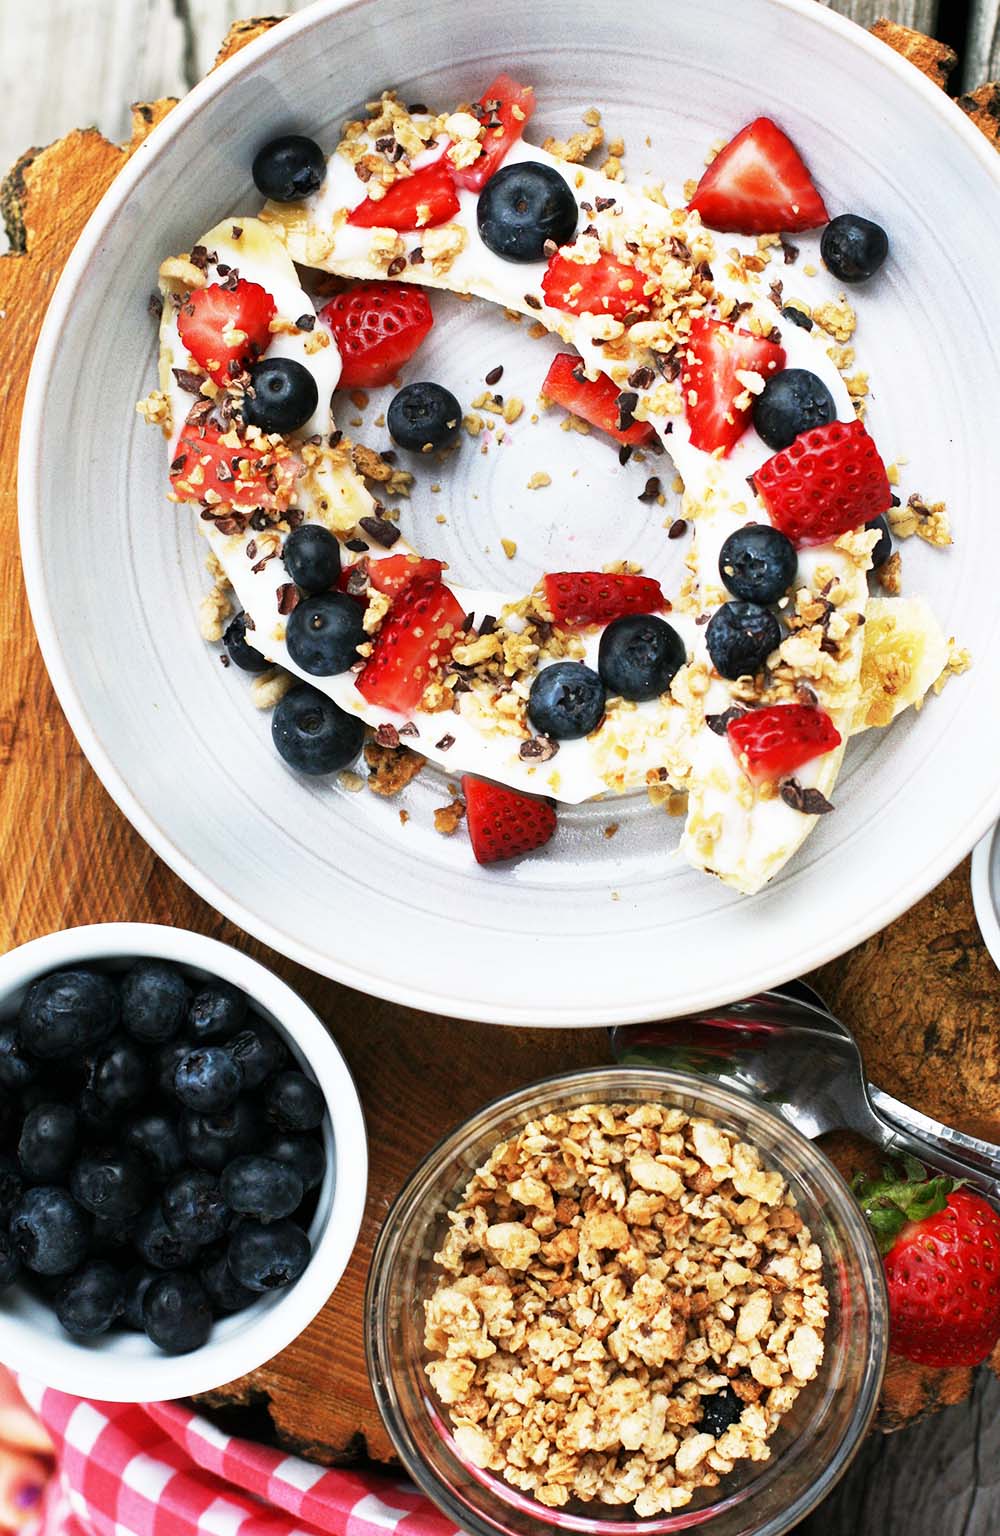 Breakfast banana splits: Learn how to make these easy, delicious breakfast dishes at home!